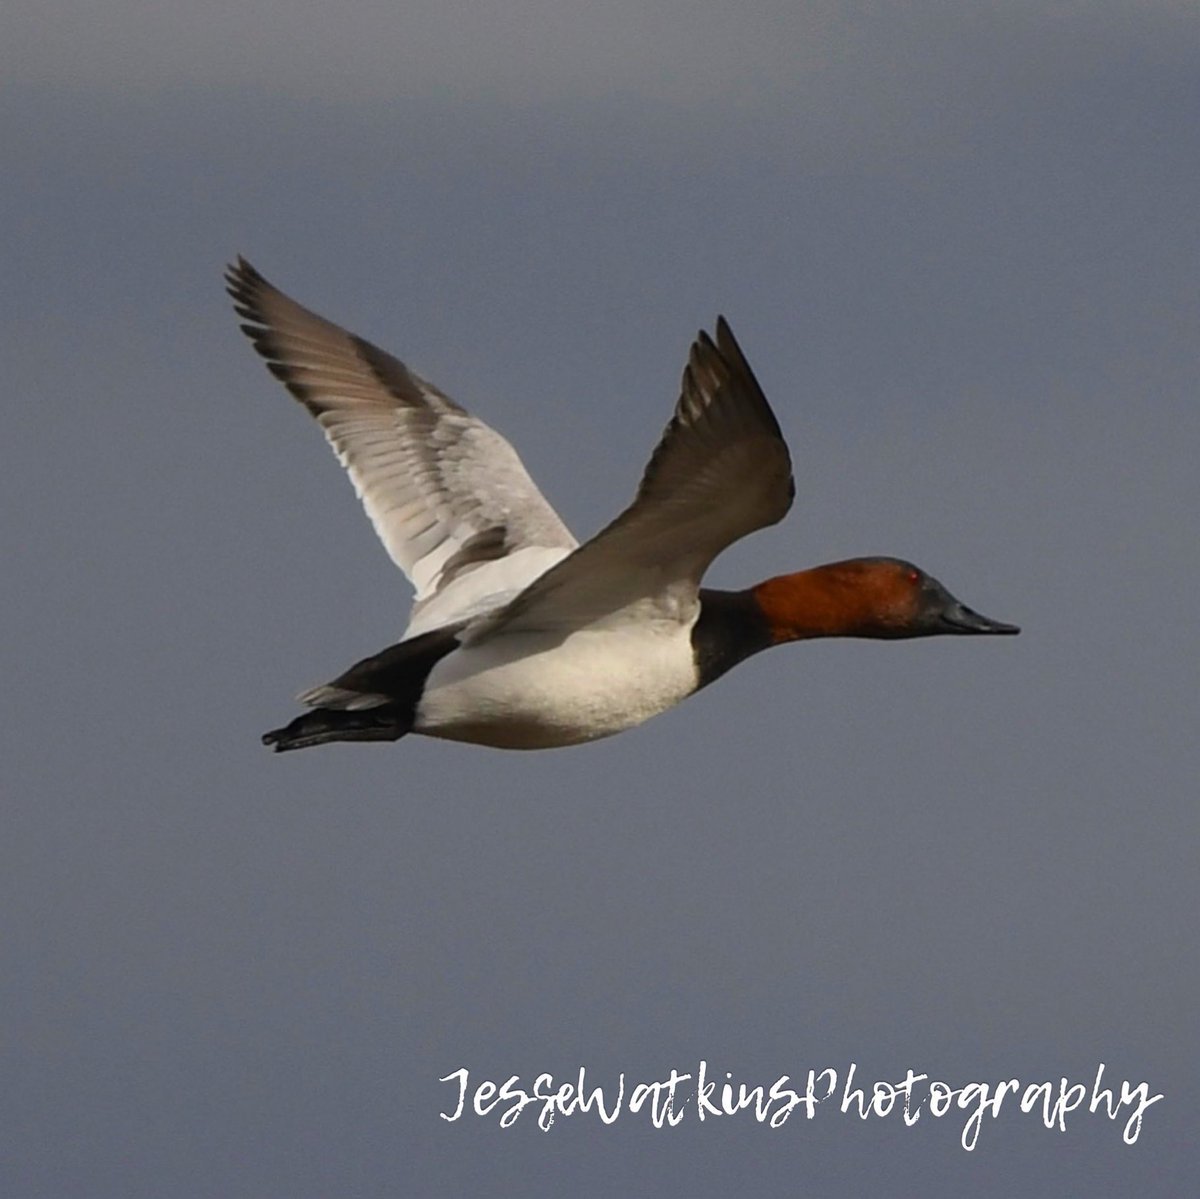 A Bull Canvasback who decided he had better places to be. Happy Fowl Friday!!! 

Nikon D500
Sigma 150-600mm
Jesse Watkins Photography 

#godscreation #canvasback #diverducks #ducksunlimited #ducks #waterfowl #waterfowlphotography #wildfowl #birdinflight #birds #birdphotography